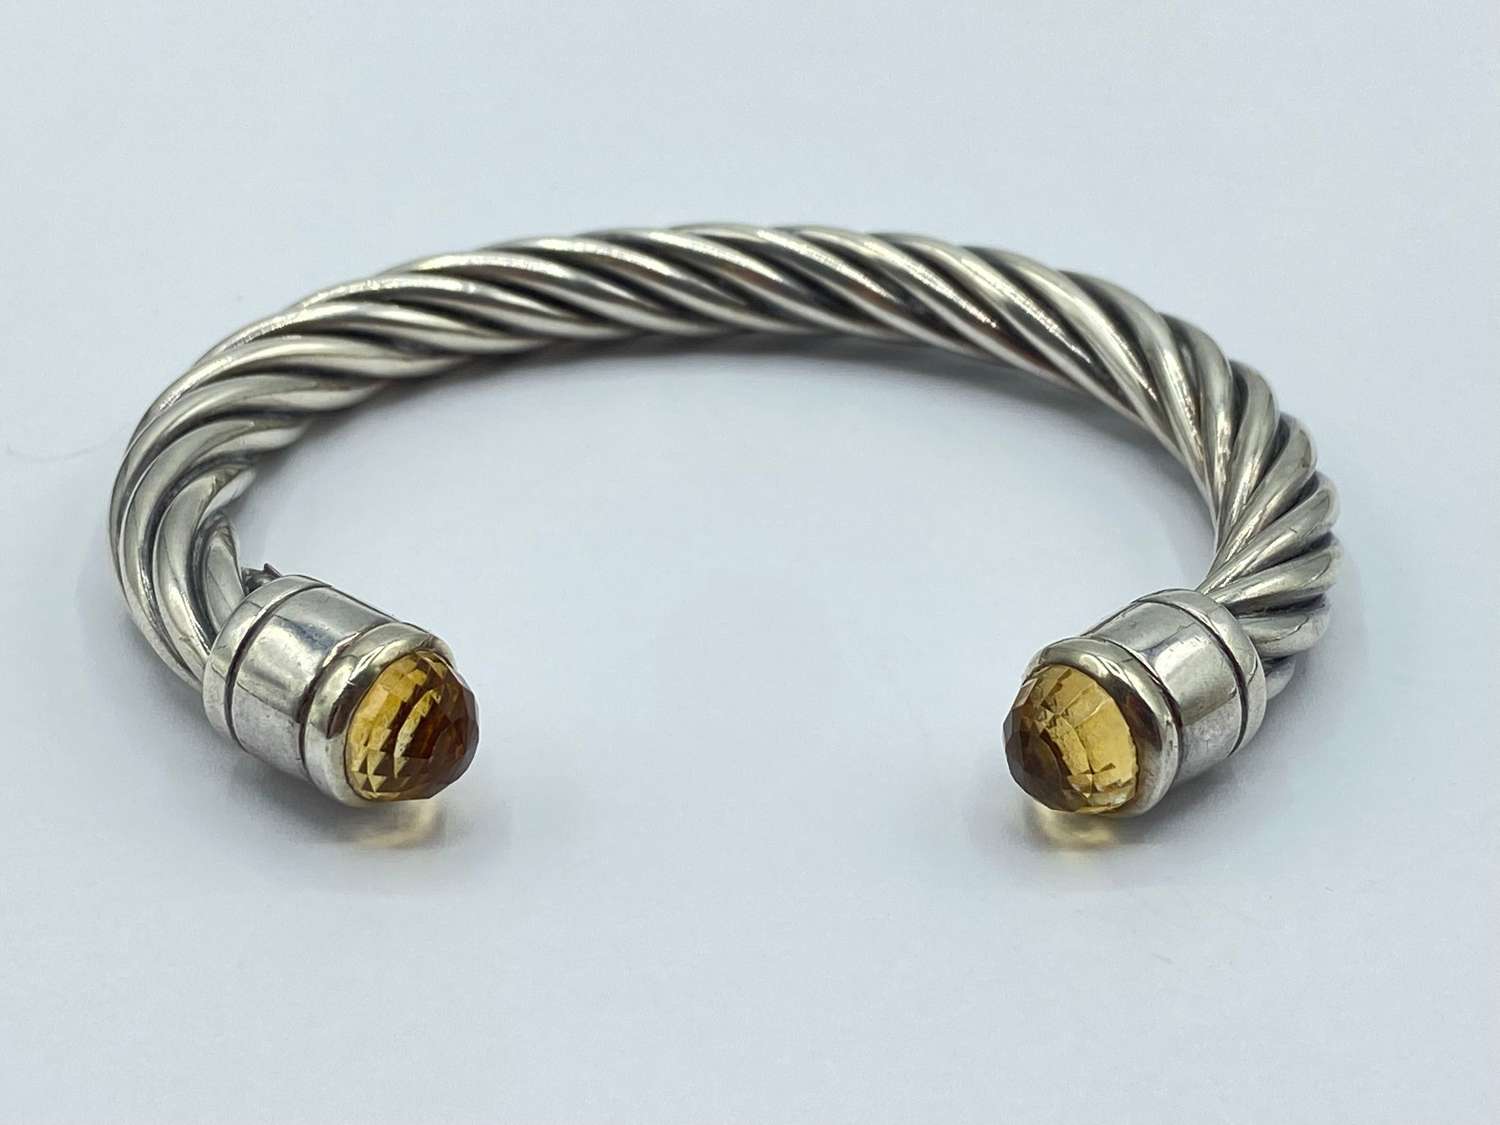 Vintage Silver & Faceted Citrine Twisted Cable Classic Bangle